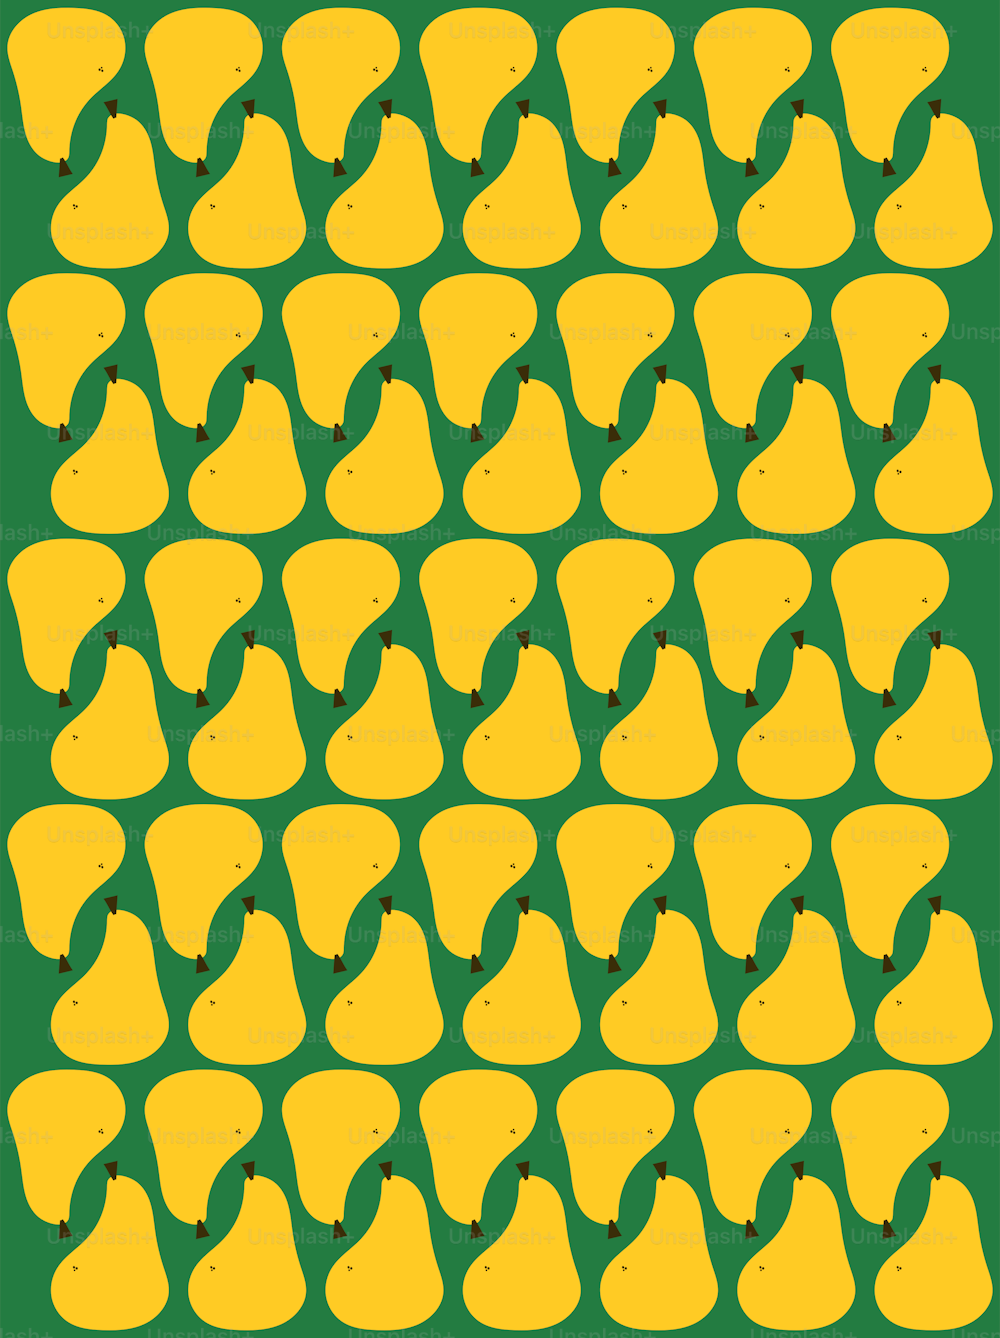 a green and yellow background with a bunch of bananas